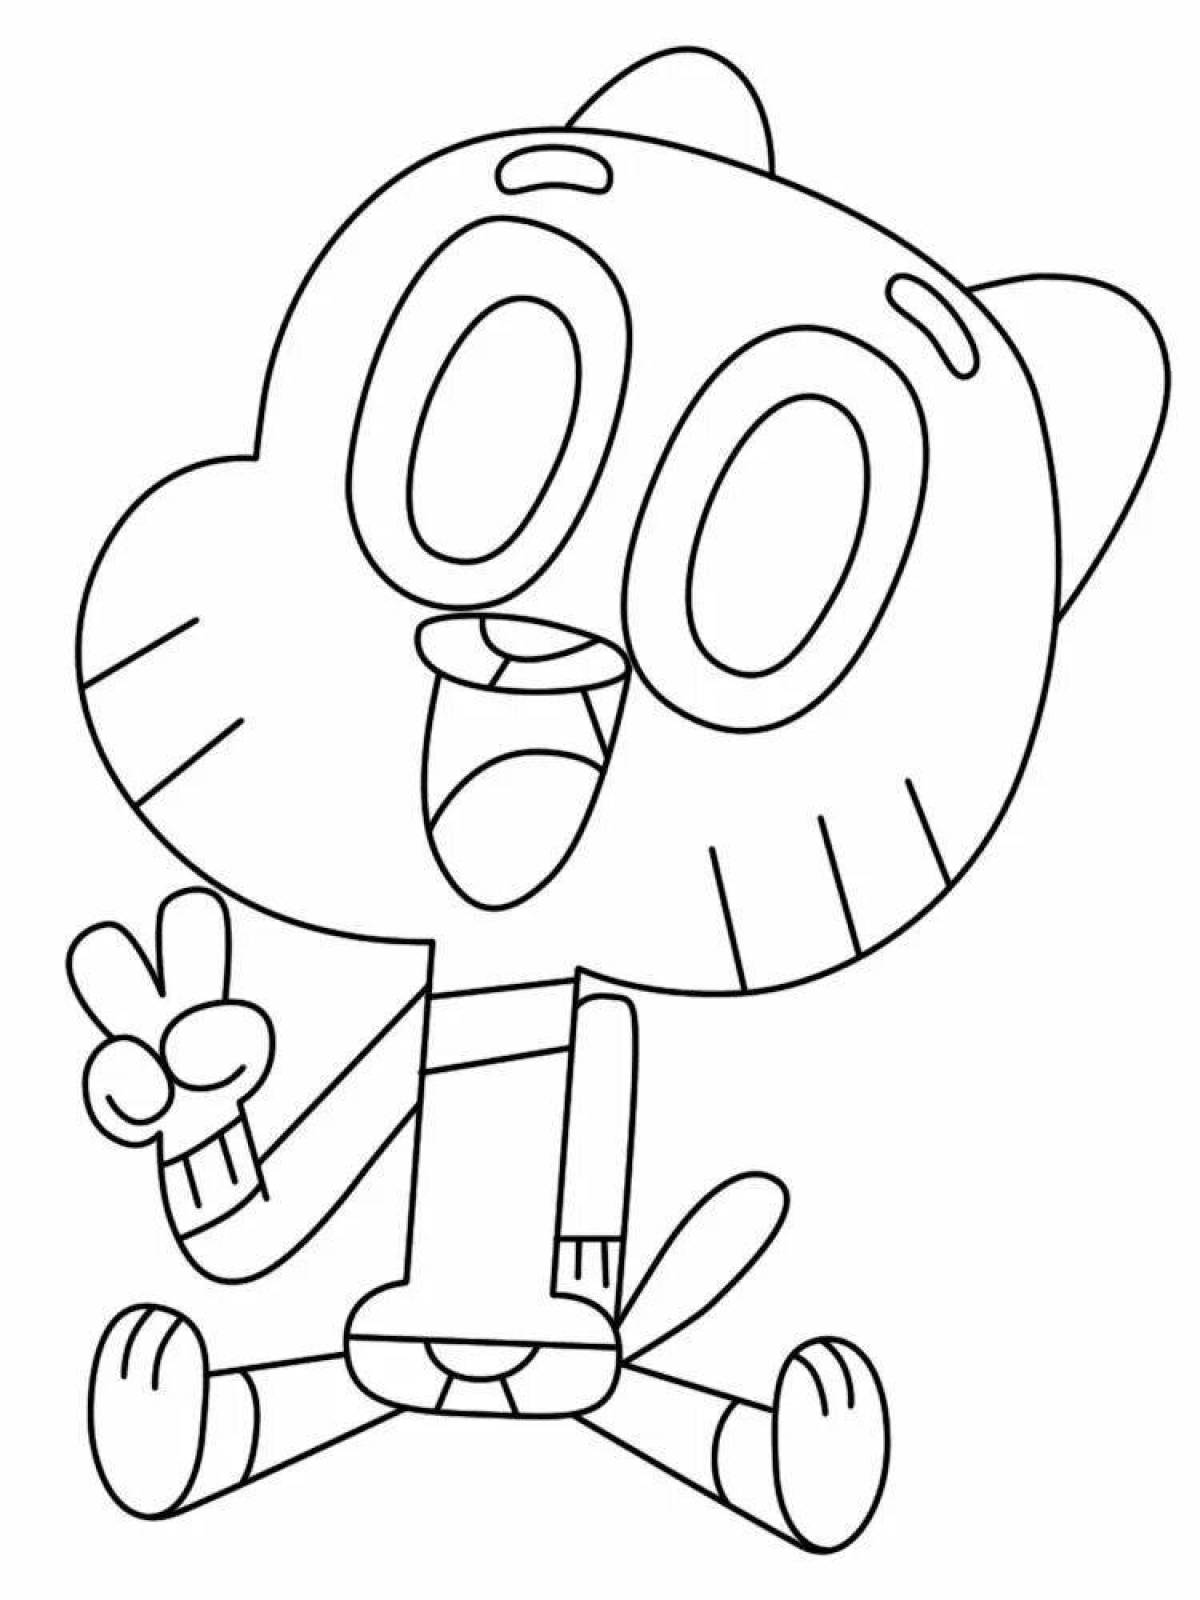 Gumball adorable coloring page